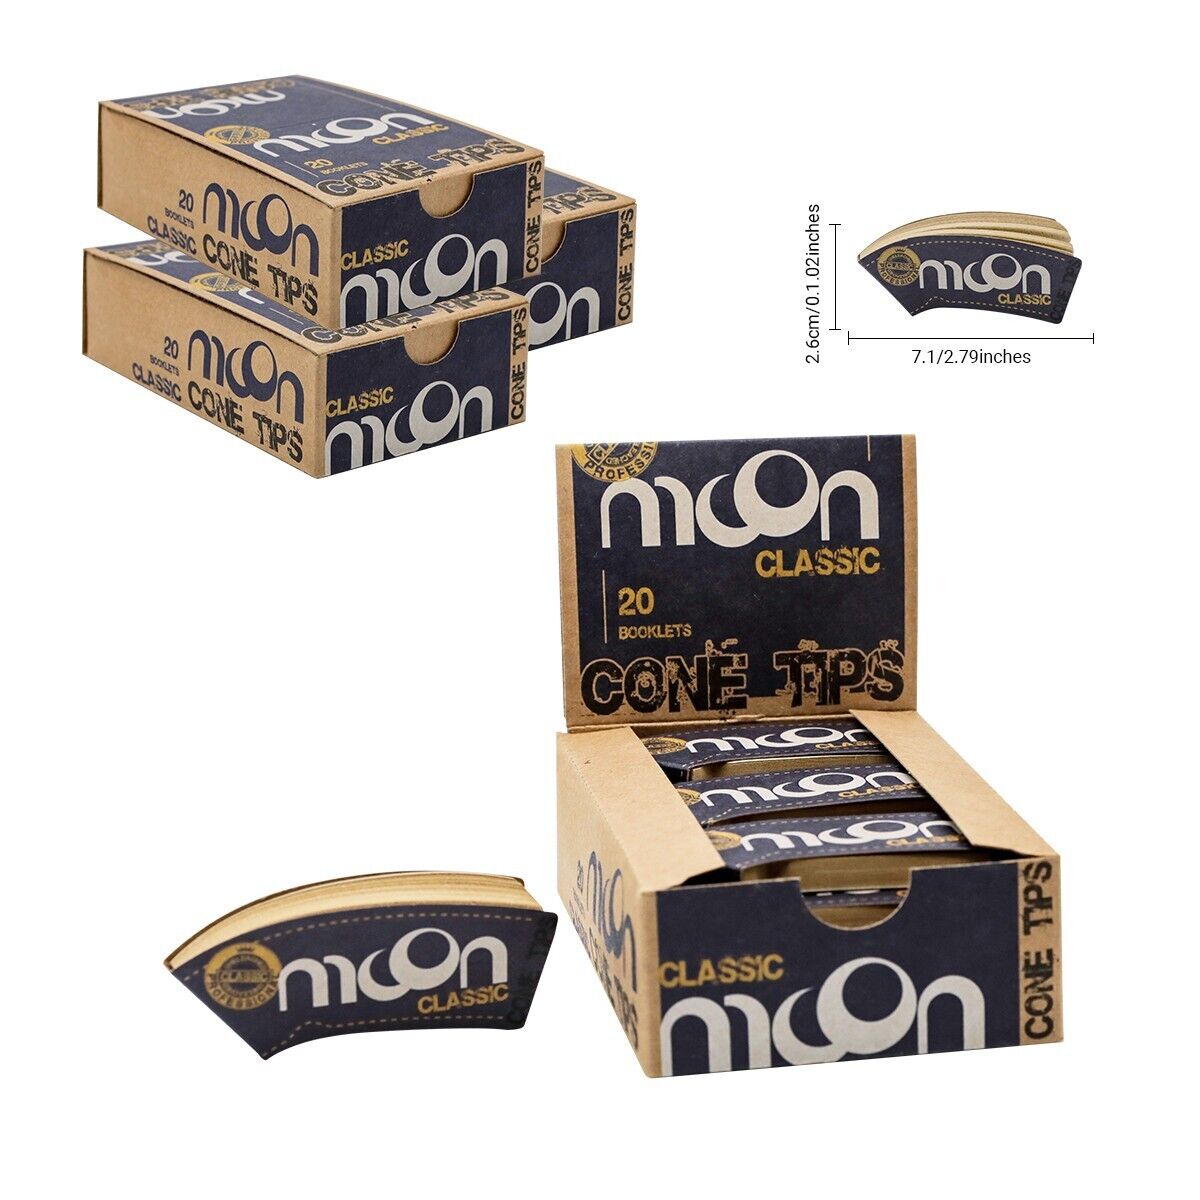 3 Box 60 Booklets Moon Unbleached Tips Rolling Paper Classic Cone Filter Tips